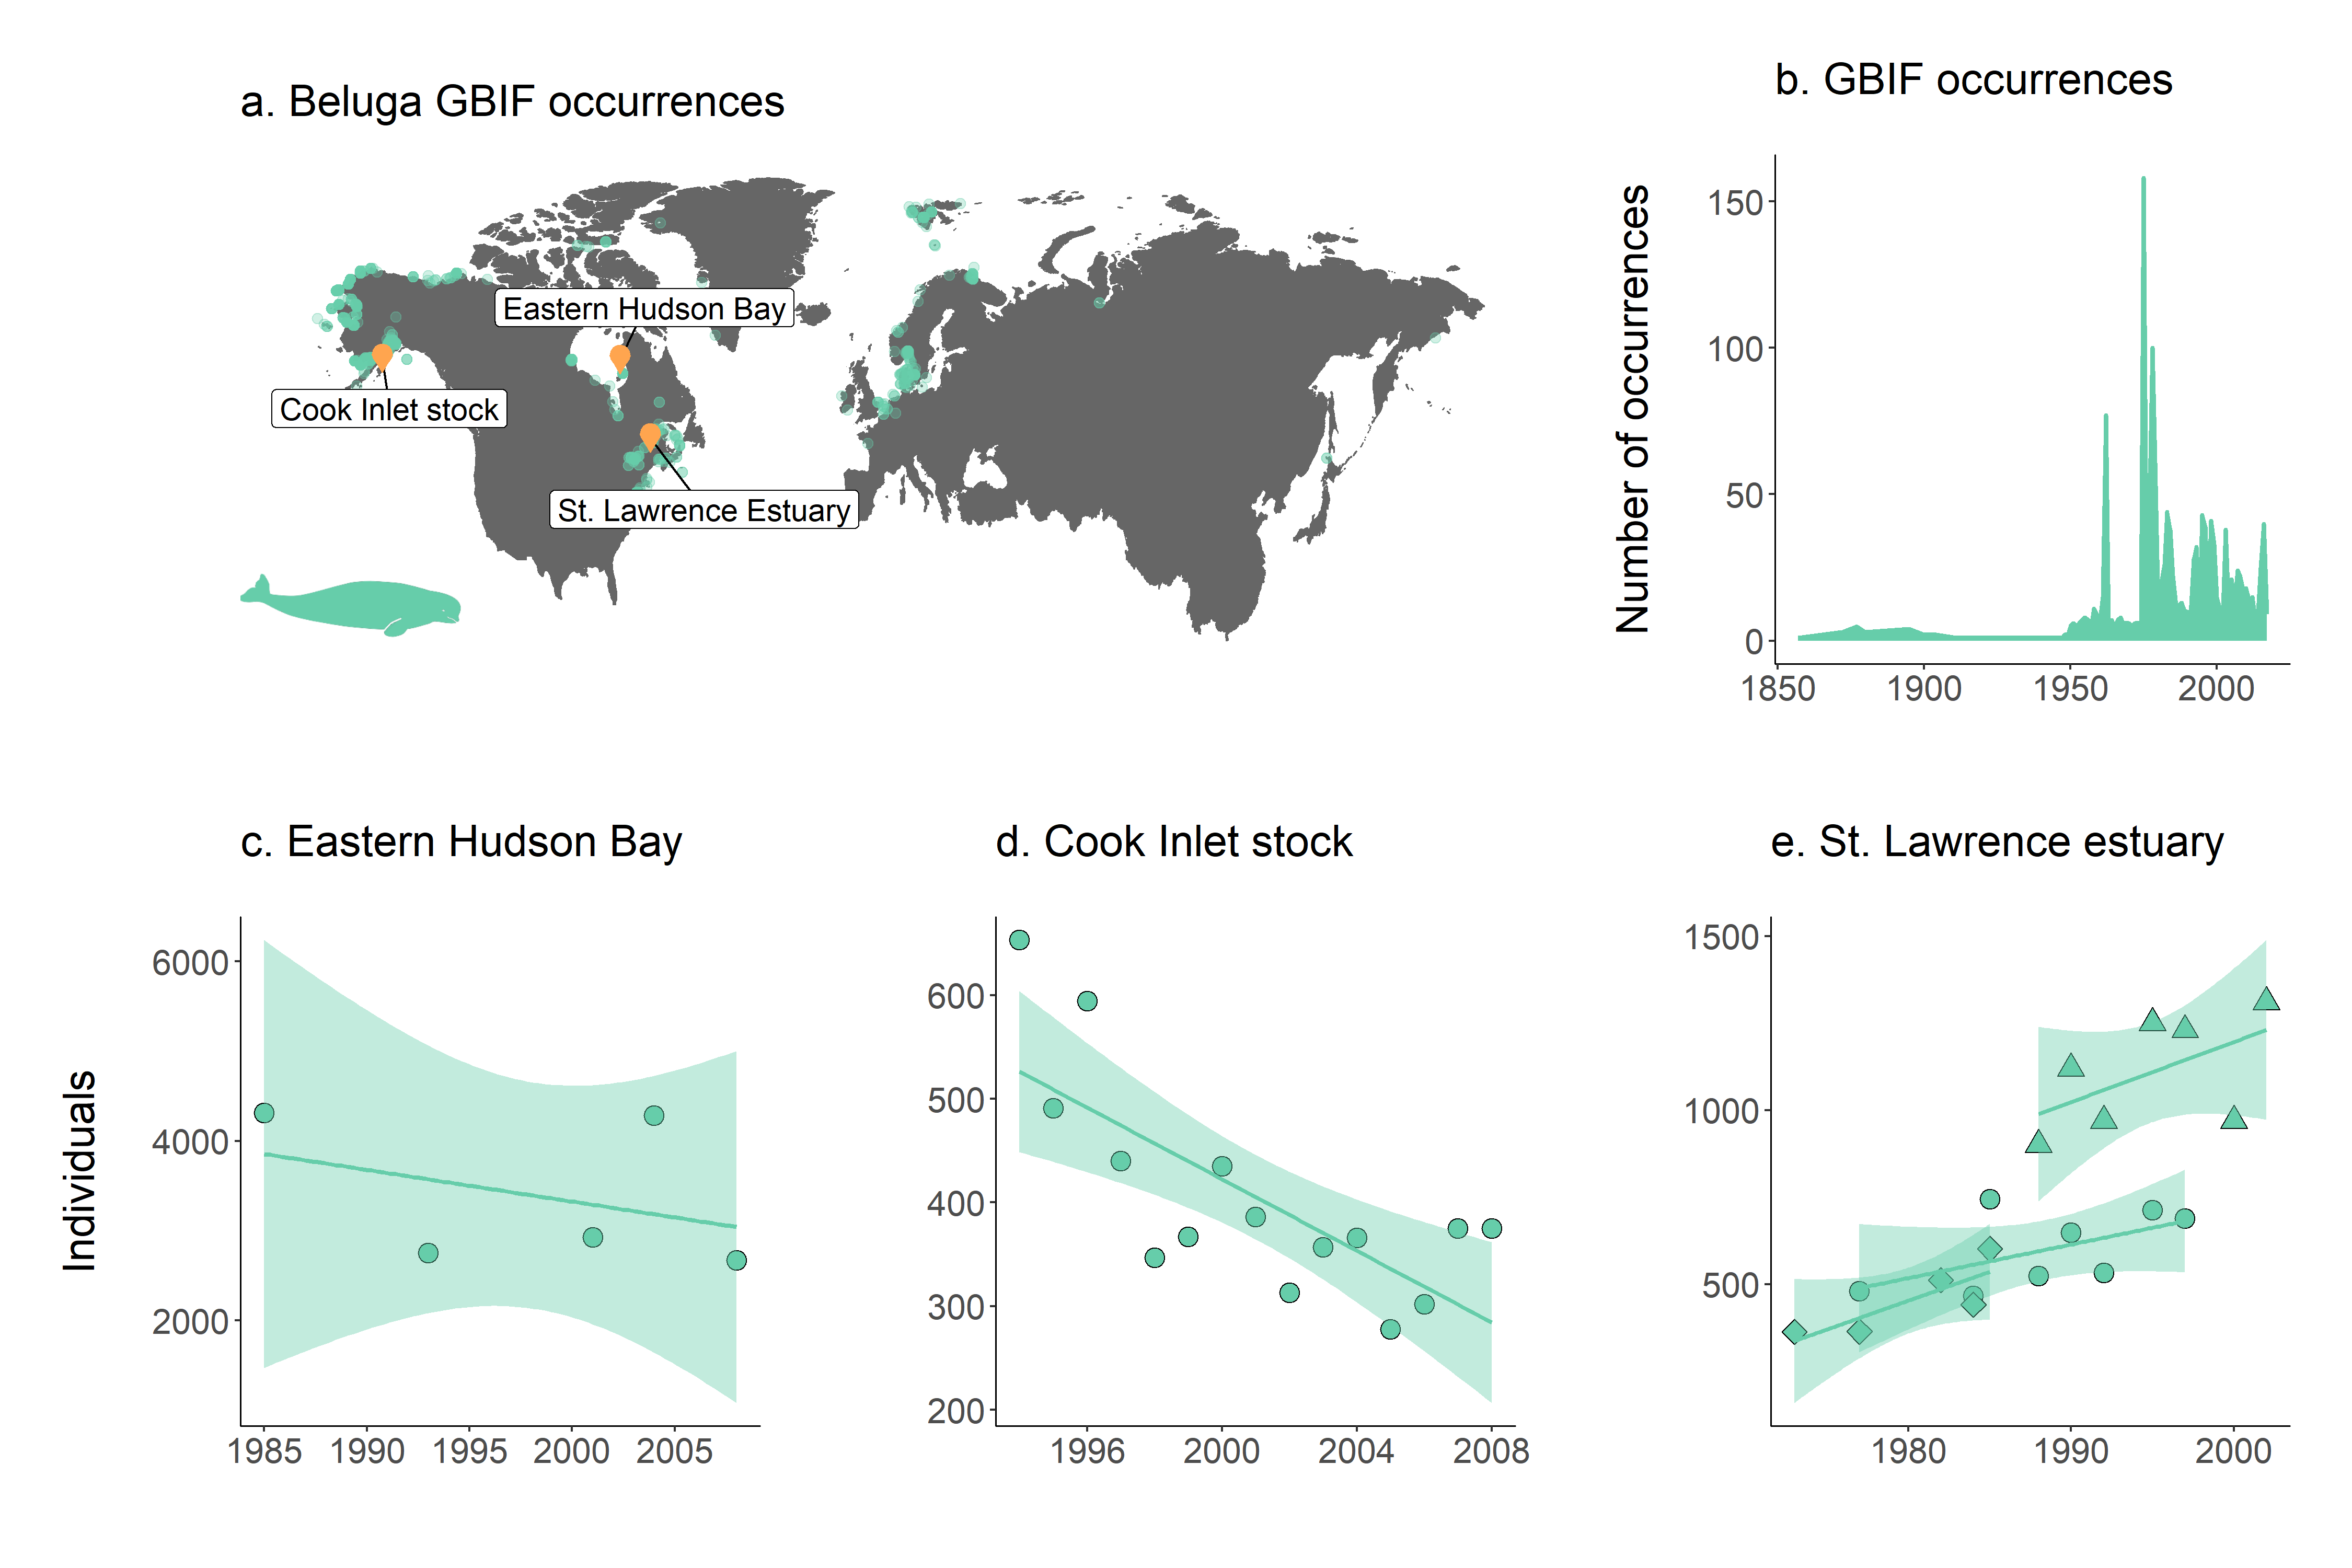 Panel of Beluga occurrences, with population trends and GBIF occurrence time series frequency